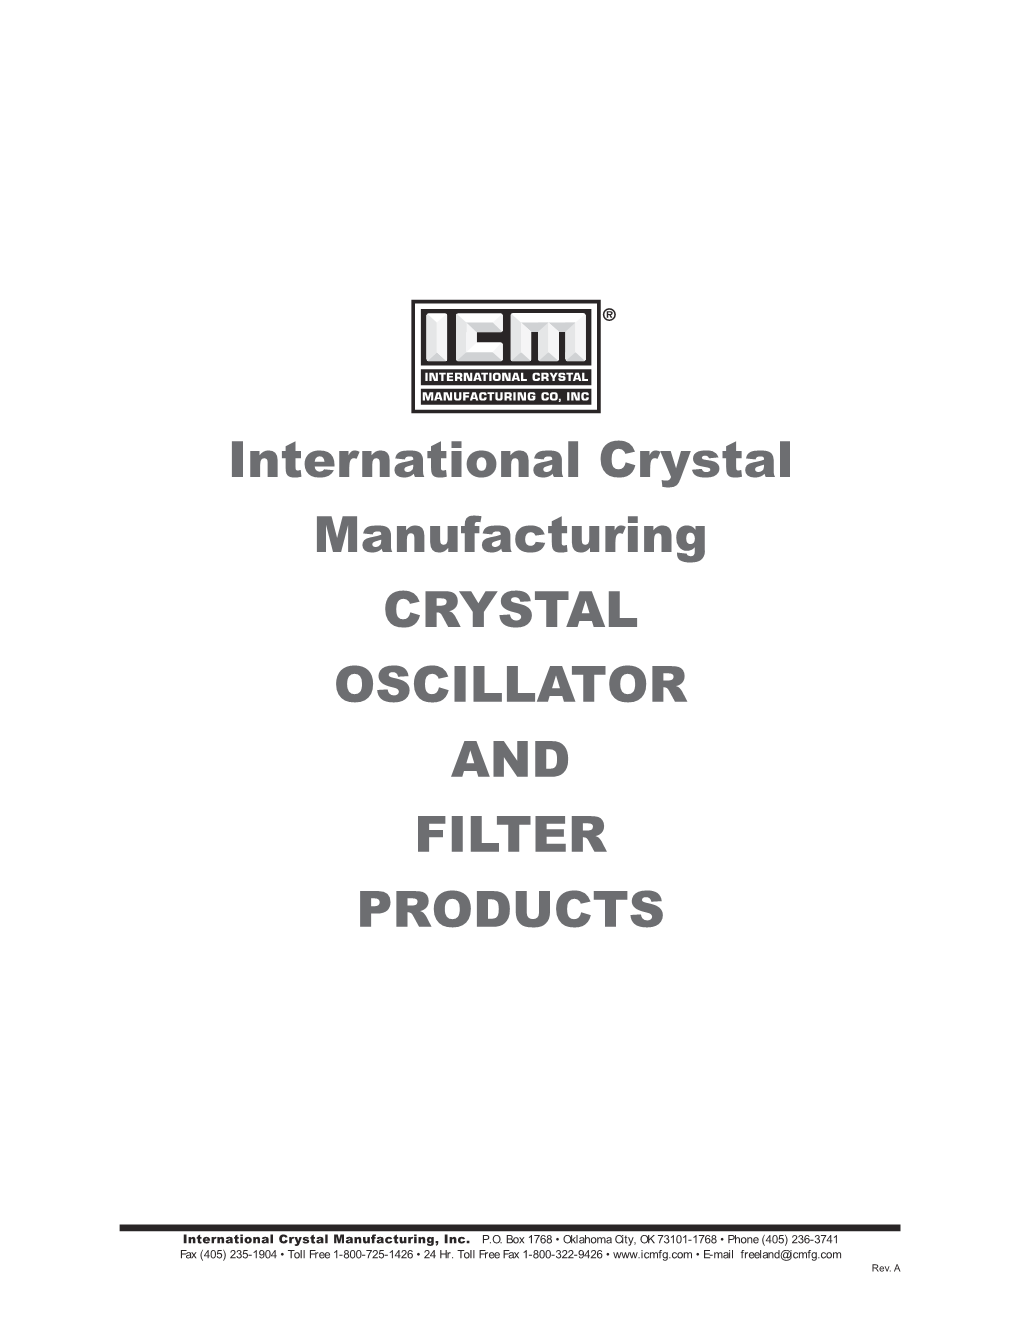 International Crystal Manufacturing CRYSTAL OSCILLATOR and FILTER PRODUCTS